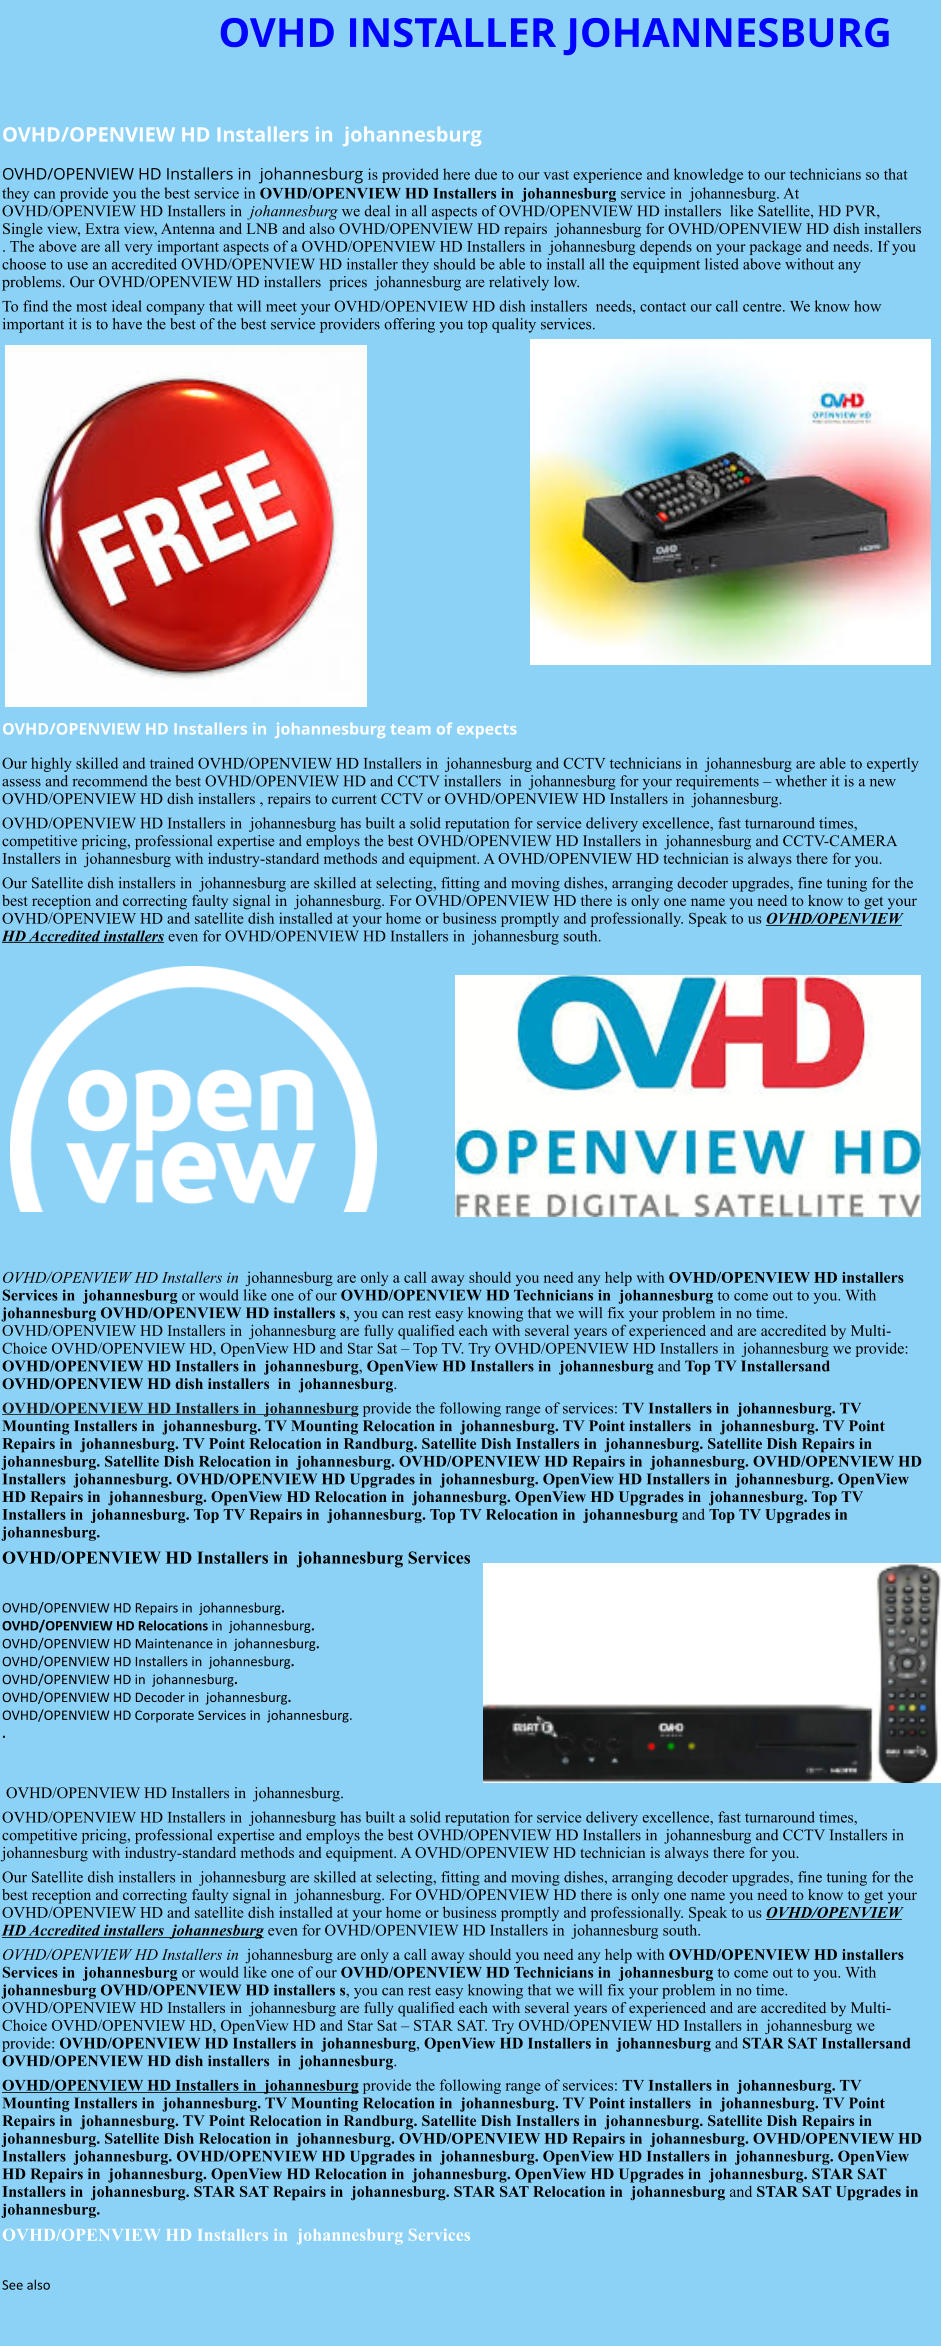 OVHD INSTALLER JOHANNESBURG  OVHD/OPENVIEW HD Installers in  johannesburg  OVHD/OPENVIEW HD Installers in  johannesburg is provided here due to our vast experience and knowledge to our technicians so that they can provide you the best service in OVHD/OPENVIEW HD Installers in  johannesburg service in  johannesburg. At OVHD/OPENVIEW HD Installers in  johannesburg we deal in all aspects of OVHD/OPENVIEW HD installers  like Satellite, HD PVR, Single view, Extra view, Antenna and LNB and also OVHD/OPENVIEW HD repairs  johannesburg for OVHD/OPENVIEW HD dish installers . The above are all very important aspects of a OVHD/OPENVIEW HD Installers in  johannesburg depends on your package and needs. If you choose to use an accredited OVHD/OPENVIEW HD installer they should be able to install all the equipment listed above without any problems. Our OVHD/OPENVIEW HD installers  prices  johannesburg are relatively low. To find the most ideal company that will meet your OVHD/OPENVIEW HD dish installers  needs, contact our call centre. We know how important it is to have the best of the best service providers offering you top quality services.                OVHD/OPENVIEW HD Installers in  johannesburg team of expects Our highly skilled and trained OVHD/OPENVIEW HD Installers in  johannesburg and CCTV technicians in  johannesburg are able to expertly assess and recommend the best OVHD/OPENVIEW HD and CCTV installers  in  johannesburg for your requirements – whether it is a new OVHD/OPENVIEW HD dish installers , repairs to current CCTV or OVHD/OPENVIEW HD Installers in  johannesburg. OVHD/OPENVIEW HD Installers in  johannesburg has built a solid reputation for service delivery excellence, fast turnaround times, competitive pricing, professional expertise and employs the best OVHD/OPENVIEW HD Installers in  johannesburg and CCTV-CAMERA Installers in  johannesburg with industry-standard methods and equipment. A OVHD/OPENVIEW HD technician is always there for you. Our Satellite dish installers in  johannesburg are skilled at selecting, fitting and moving dishes, arranging decoder upgrades, fine tuning for the best reception and correcting faulty signal in  johannesburg. For OVHD/OPENVIEW HD there is only one name you need to know to get your OVHD/OPENVIEW HD and satellite dish installed at your home or business promptly and professionally. Speak to us OVHD/OPENVIEW HD Accredited installers even for OVHD/OPENVIEW HD Installers in  johannesburg south.              OVHD/OPENVIEW HD Installers in  johannesburg are only a call away should you need any help with OVHD/OPENVIEW HD installers  Services in  johannesburg or would like one of our OVHD/OPENVIEW HD Technicians in  johannesburg to come out to you. With  johannesburg OVHD/OPENVIEW HD installers s, you can rest easy knowing that we will fix your problem in no time. OVHD/OPENVIEW HD Installers in  johannesburg are fully qualified each with several years of experienced and are accredited by Multi-Choice OVHD/OPENVIEW HD, OpenView HD and Star Sat – Top TV. Try OVHD/OPENVIEW HD Installers in  johannesburg we provide: OVHD/OPENVIEW HD Installers in  johannesburg, OpenView HD Installers in  johannesburg and Top TV Installersand OVHD/OPENVIEW HD dish installers  in  johannesburg. OVHD/OPENVIEW HD Installers in  johannesburg provide the following range of services: TV Installers in  johannesburg. TV Mounting Installers in  johannesburg. TV Mounting Relocation in  johannesburg. TV Point installers  in  johannesburg. TV Point Repairs in  johannesburg. TV Point Relocation in Randburg. Satellite Dish Installers in  johannesburg. Satellite Dish Repairs in  johannesburg. Satellite Dish Relocation in  johannesburg. OVHD/OPENVIEW HD Repairs in  johannesburg. OVHD/OPENVIEW HD Installers  johannesburg. OVHD/OPENVIEW HD Upgrades in  johannesburg. OpenView HD Installers in  johannesburg. OpenView HD Repairs in  johannesburg. OpenView HD Relocation in  johannesburg. OpenView HD Upgrades in  johannesburg. Top TV Installers in  johannesburg. Top TV Repairs in  johannesburg. Top TV Relocation in  johannesburg and Top TV Upgrades in  johannesburg. OVHD/OPENVIEW HD Installers in  johannesburg Services  OVHD/OPENVIEW HD Repairs in  johannesburg.  OVHD/OPENVIEW HD Relocations in  johannesburg.  OVHD/OPENVIEW HD Maintenance in  johannesburg. OVHD/OPENVIEW HD Installers in  johannesburg. OVHD/OPENVIEW HD in  johannesburg. OVHD/OPENVIEW HD Decoder in  johannesburg. OVHD/OPENVIEW HD Corporate Services in  johannesburg. .    OVHD/OPENVIEW HD Installers in  johannesburg. OVHD/OPENVIEW HD Installers in  johannesburg has built a solid reputation for service delivery excellence, fast turnaround times, competitive pricing, professional expertise and employs the best OVHD/OPENVIEW HD Installers in  johannesburg and CCTV Installers in  johannesburg with industry-standard methods and equipment. A OVHD/OPENVIEW HD technician is always there for you. Our Satellite dish installers in  johannesburg are skilled at selecting, fitting and moving dishes, arranging decoder upgrades, fine tuning for the best reception and correcting faulty signal in  johannesburg. For OVHD/OPENVIEW HD there is only one name you need to know to get your OVHD/OPENVIEW HD and satellite dish installed at your home or business promptly and professionally. Speak to us OVHD/OPENVIEW HD Accredited installers  johannesburg even for OVHD/OPENVIEW HD Installers in  johannesburg south. OVHD/OPENVIEW HD Installers in  johannesburg are only a call away should you need any help with OVHD/OPENVIEW HD installers  Services in  johannesburg or would like one of our OVHD/OPENVIEW HD Technicians in  johannesburg to come out to you. With  johannesburg OVHD/OPENVIEW HD installers s, you can rest easy knowing that we will fix your problem in no time. OVHD/OPENVIEW HD Installers in  johannesburg are fully qualified each with several years of experienced and are accredited by Multi-Choice OVHD/OPENVIEW HD, OpenView HD and Star Sat – STAR SAT. Try OVHD/OPENVIEW HD Installers in  johannesburg we provide: OVHD/OPENVIEW HD Installers in  johannesburg, OpenView HD Installers in  johannesburg and STAR SAT Installersand OVHD/OPENVIEW HD dish installers  in  johannesburg. OVHD/OPENVIEW HD Installers in  johannesburg provide the following range of services: TV Installers in  johannesburg. TV Mounting Installers in  johannesburg. TV Mounting Relocation in  johannesburg. TV Point installers  in  johannesburg. TV Point Repairs in  johannesburg. TV Point Relocation in Randburg. Satellite Dish Installers in  johannesburg. Satellite Dish Repairs in  johannesburg. Satellite Dish Relocation in  johannesburg. OVHD/OPENVIEW HD Repairs in  johannesburg. OVHD/OPENVIEW HD Installers  johannesburg. OVHD/OPENVIEW HD Upgrades in  johannesburg. OpenView HD Installers in  johannesburg. OpenView HD Repairs in  johannesburg. OpenView HD Relocation in  johannesburg. OpenView HD Upgrades in  johannesburg. STAR SAT Installers in  johannesburg. STAR SAT Repairs in  johannesburg. STAR SAT Relocation in  johannesburg and STAR SAT Upgrades in  johannesburg. OVHD/OPENVIEW HD Installers in  johannesburg Services  See also